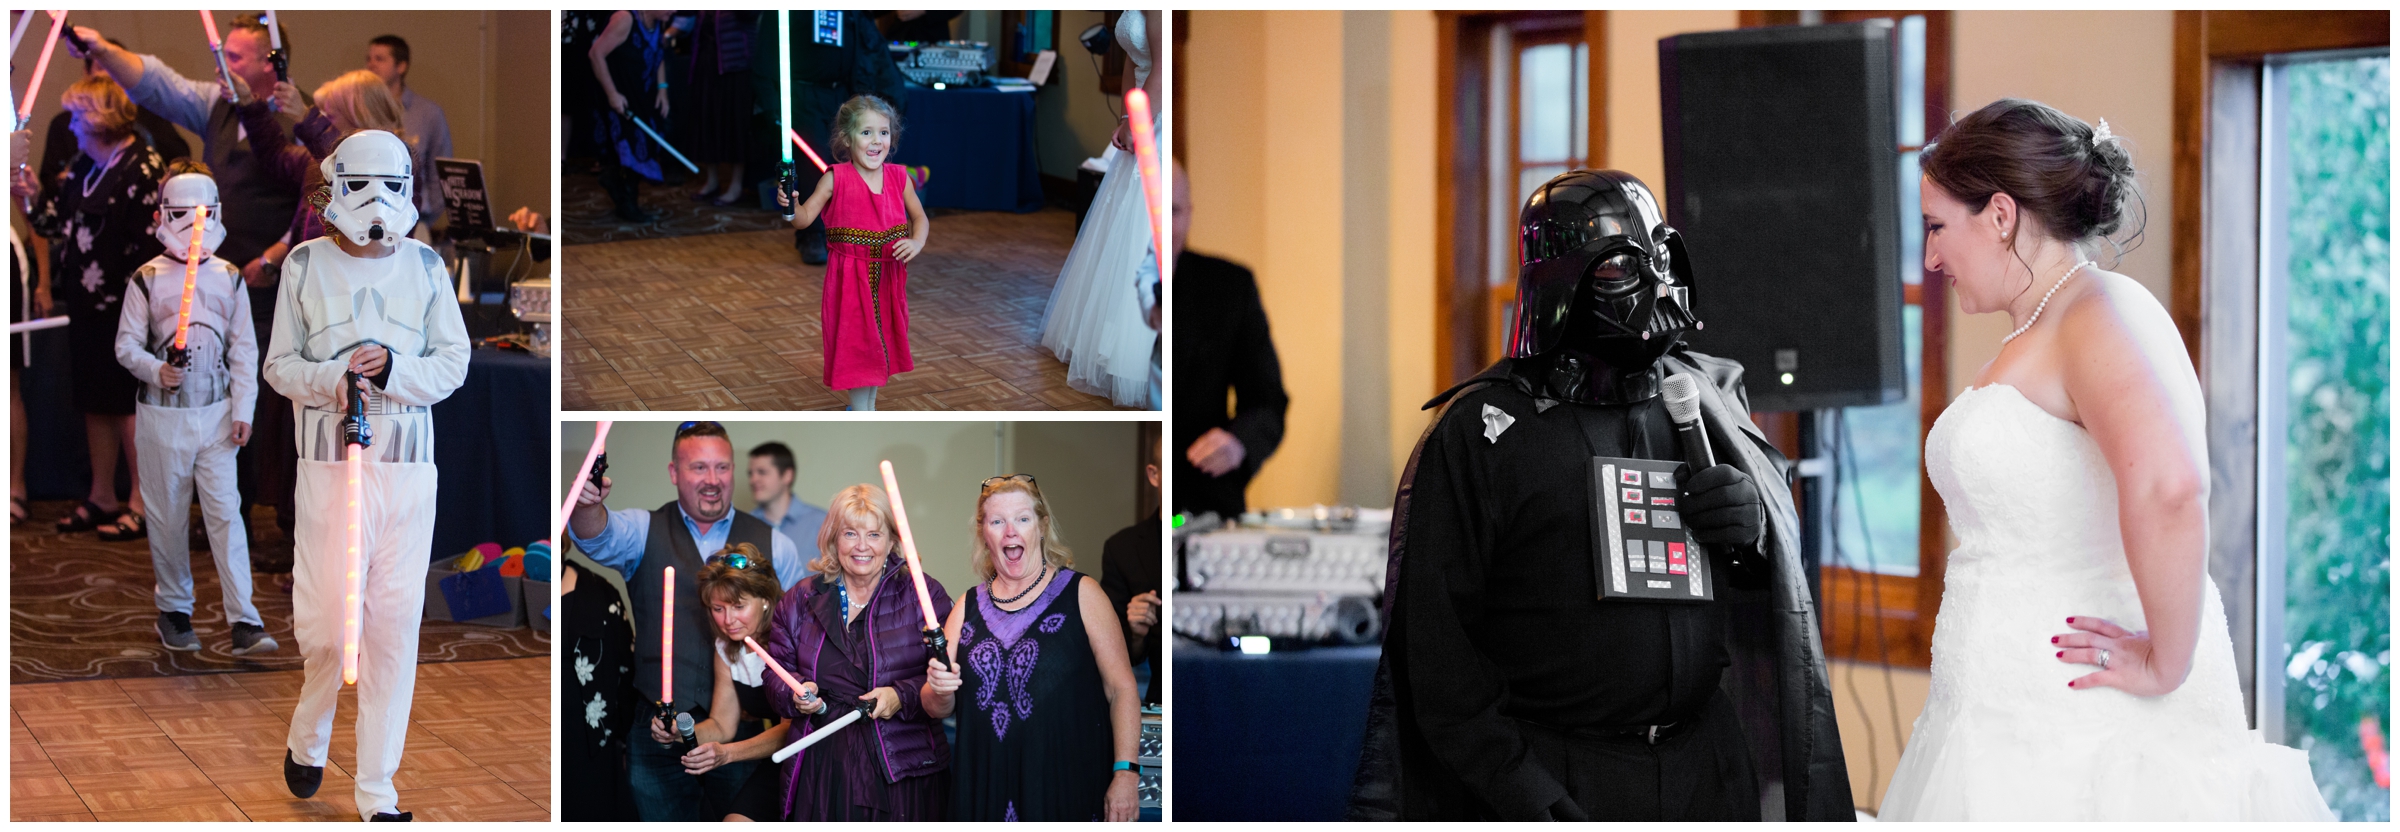 wedding guests dressed up as star wars characters 